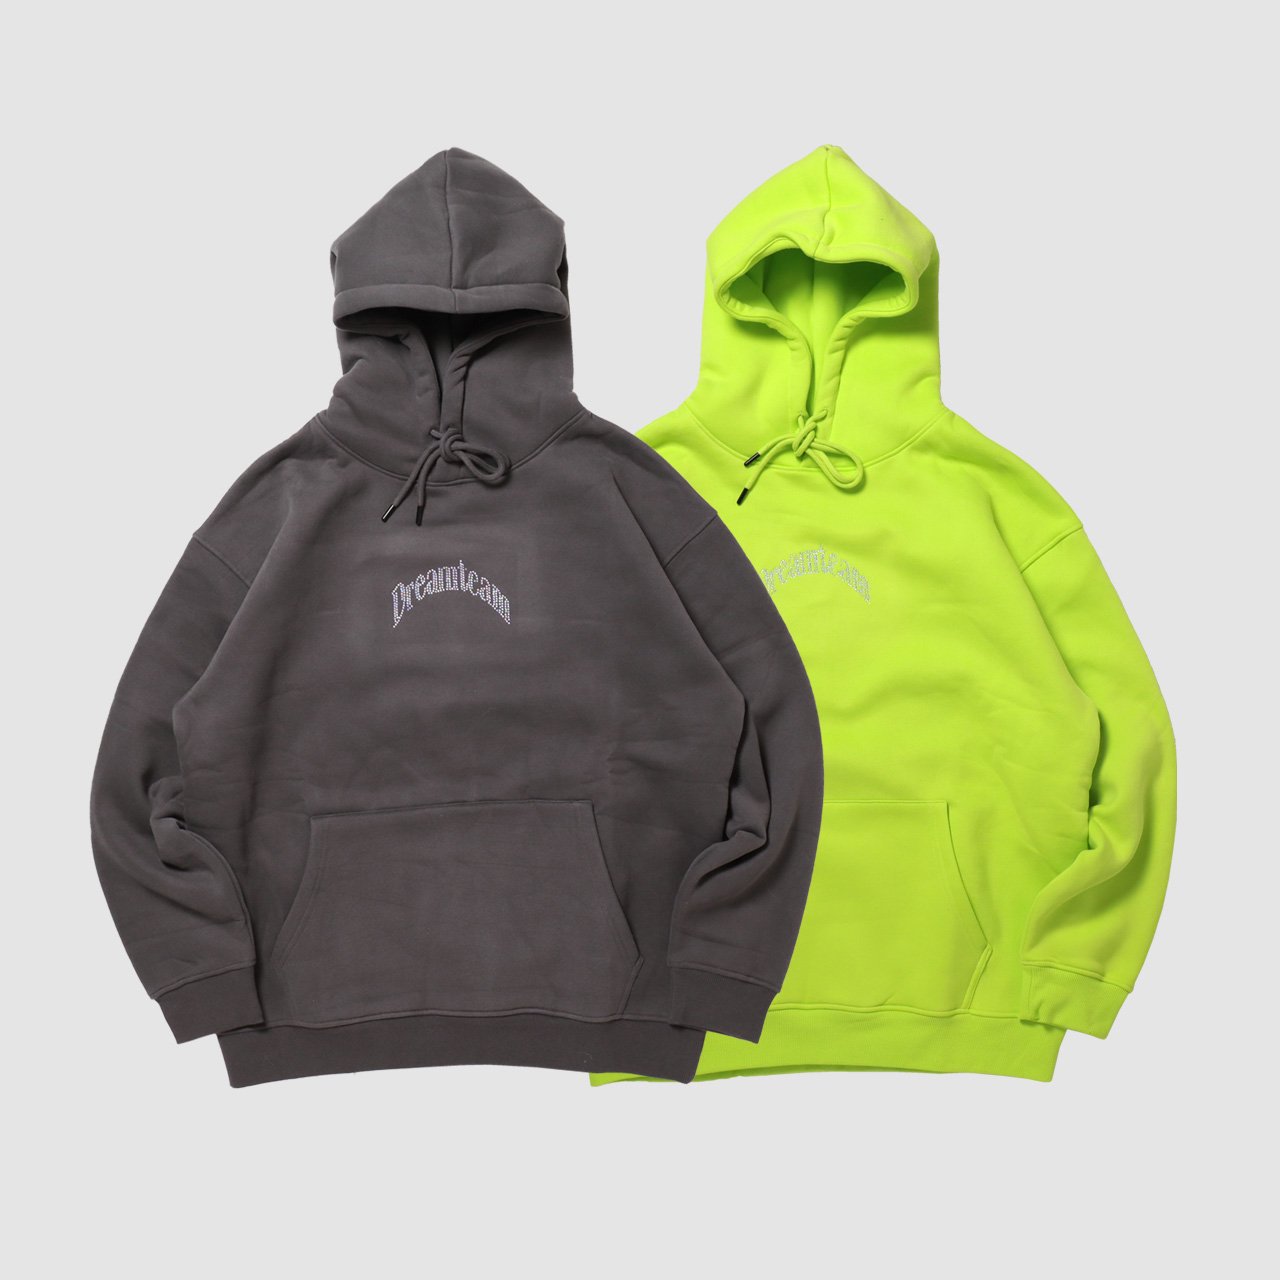 <img class='new_mark_img1' src='https://img.shop-pro.jp/img/new/icons21.gif' style='border:none;display:inline;margin:0px;padding:0px;width:auto;' />Rhinestone Arch Logo Hooded Pullover